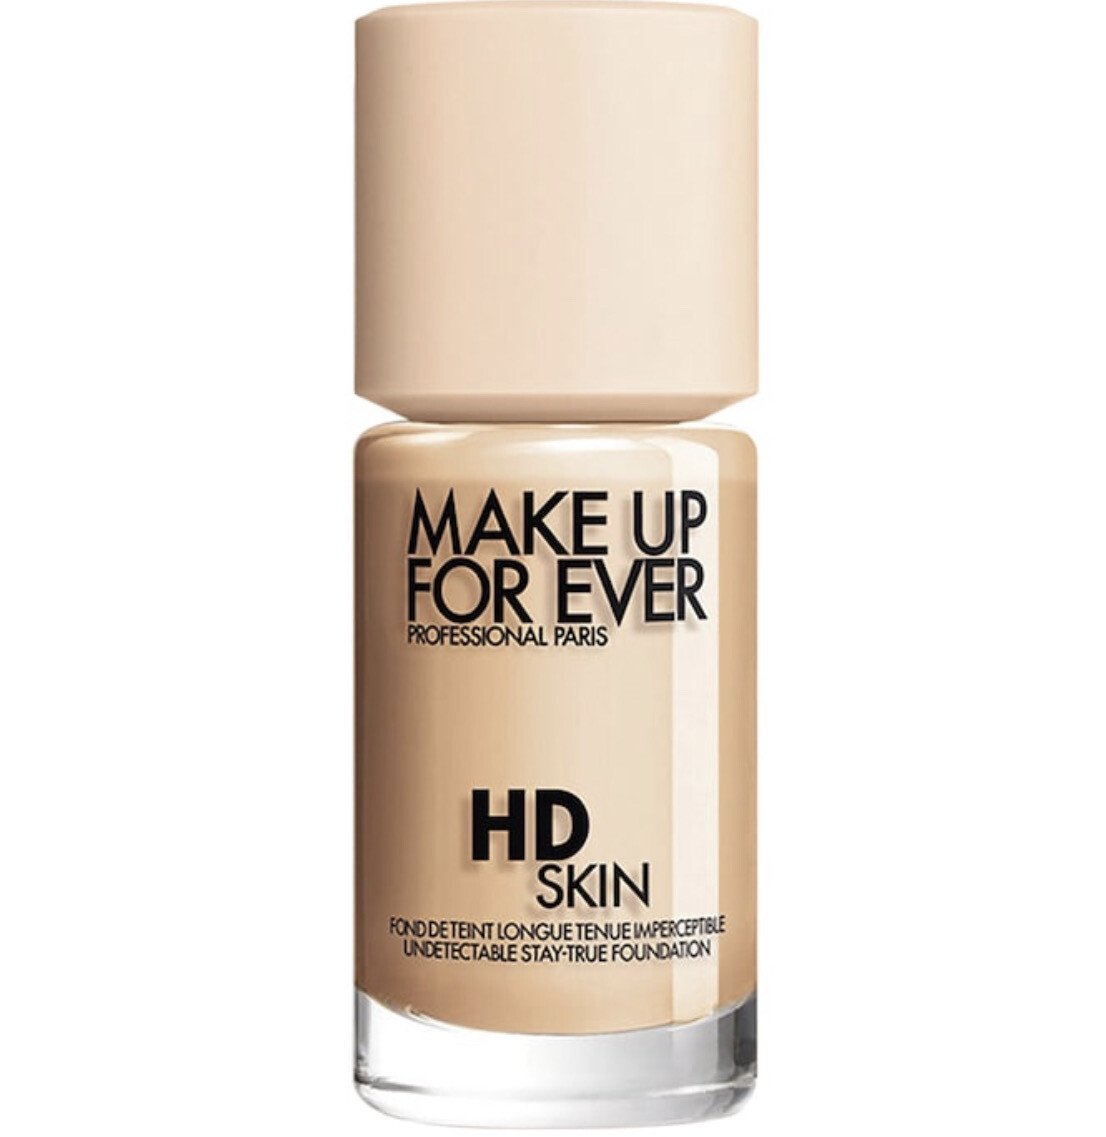 Make Up For Ever - HD Skin Undetectable Longwear Foundation | 1Y08 Warm Porcelain - for fair to light skin tones with yellow undertones